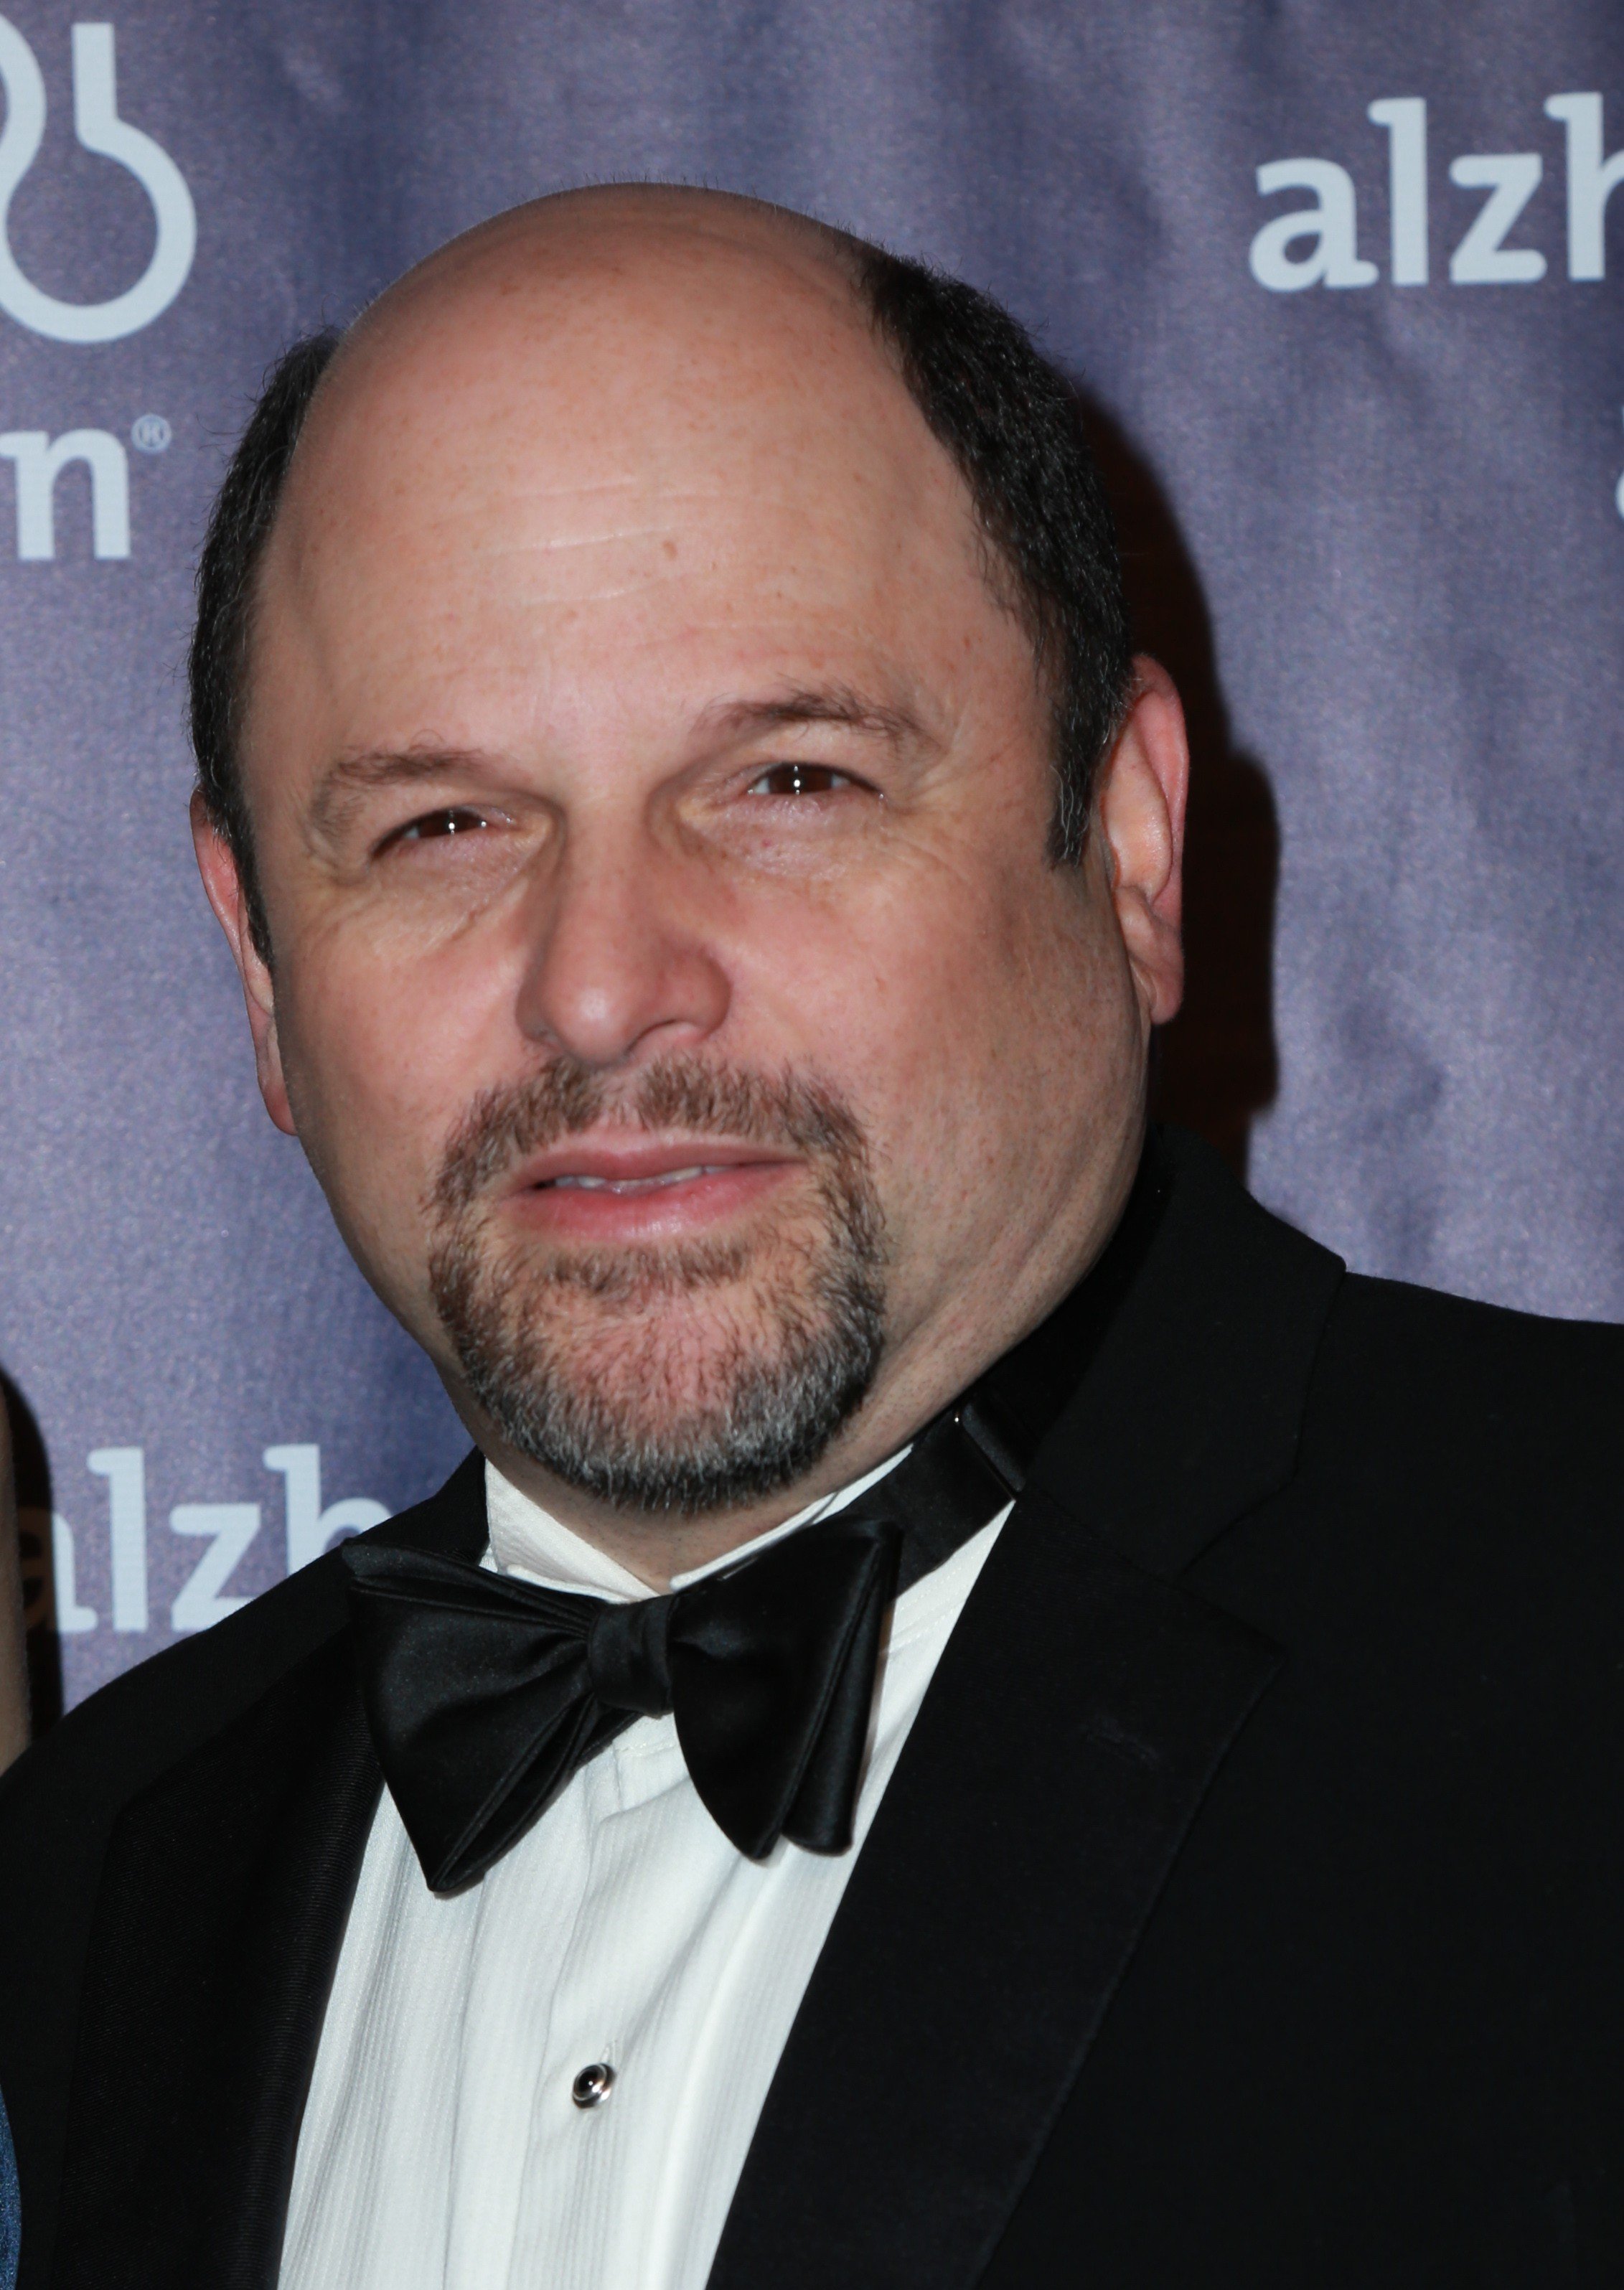 Jason Alexander attends the 23rd Annual 'A Night At Sardi's' To Benefit The Alzheimer's Association at The Beverly Hilton Hotel on March 18, 2015 in Beverly Hills.